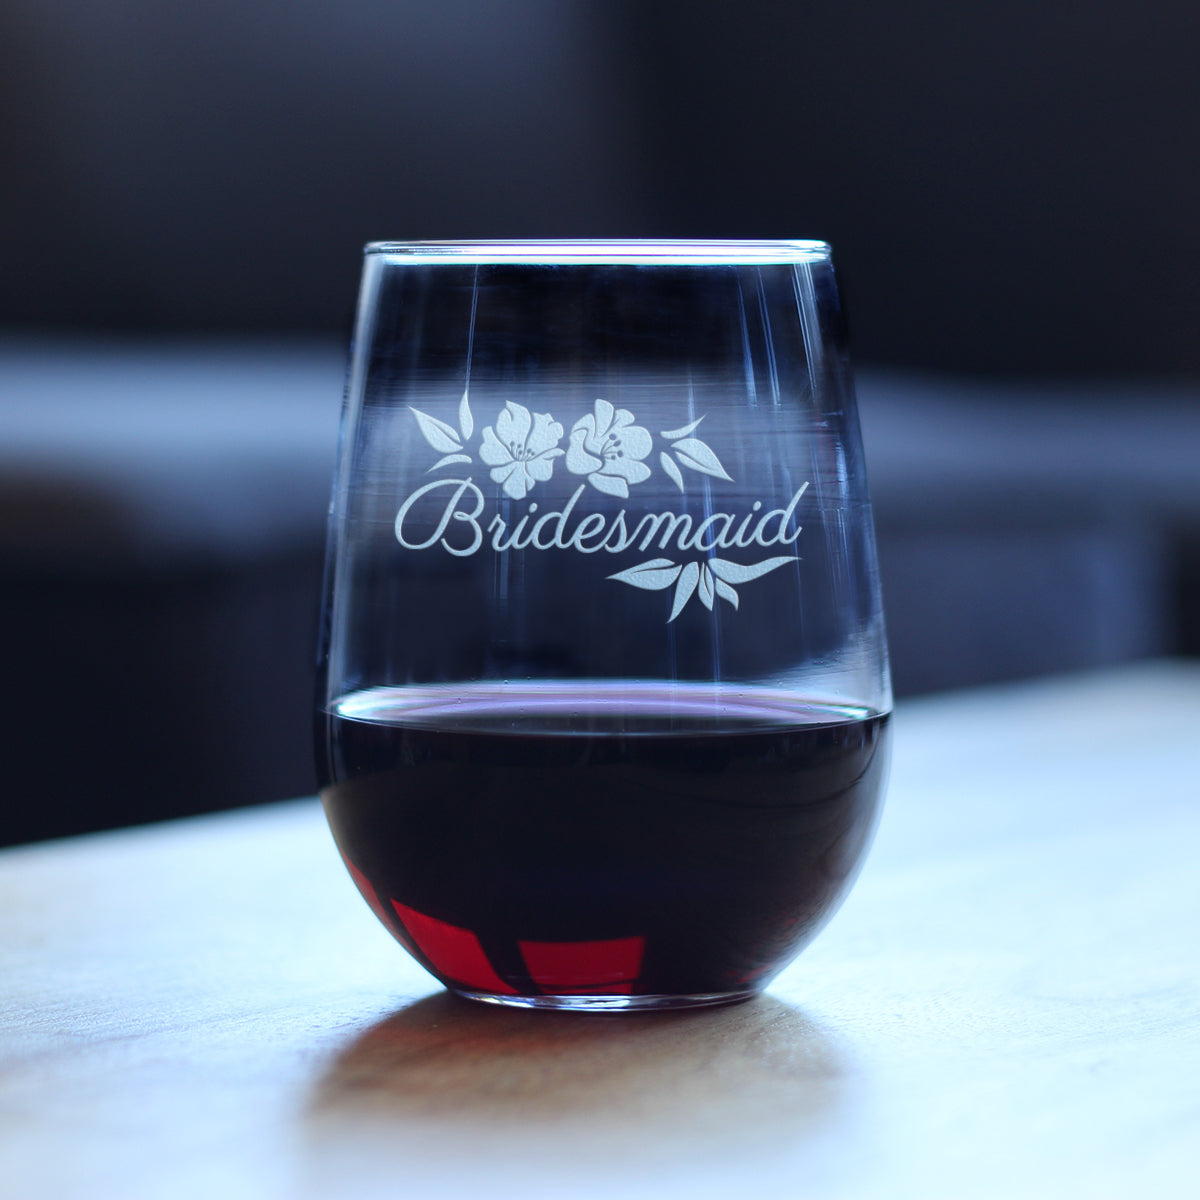 Bridesmaid Stemless Wine Glass - Bridesmaids Proposal Gifts - Unique Engraved Wedding Cup Gift